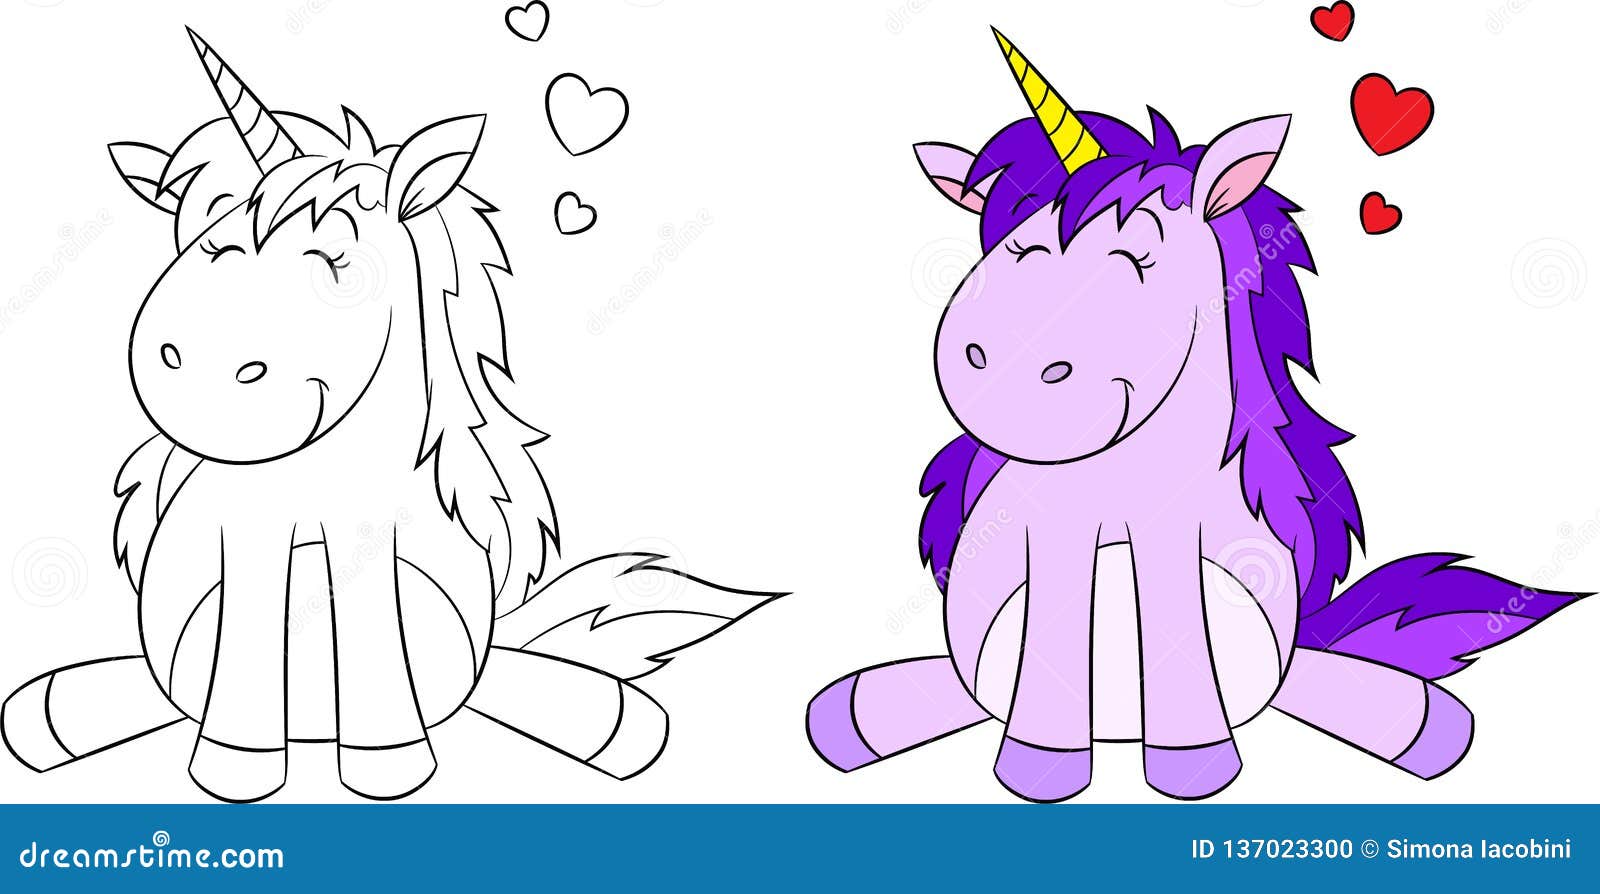 Kawaii Before And After Illustration Of A Unicorn With Hearts